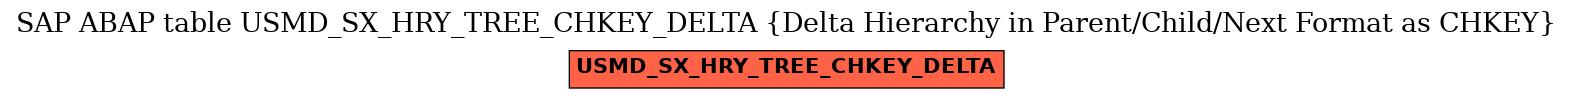 E-R Diagram for table USMD_SX_HRY_TREE_CHKEY_DELTA (Delta Hierarchy in Parent/Child/Next Format as CHKEY)